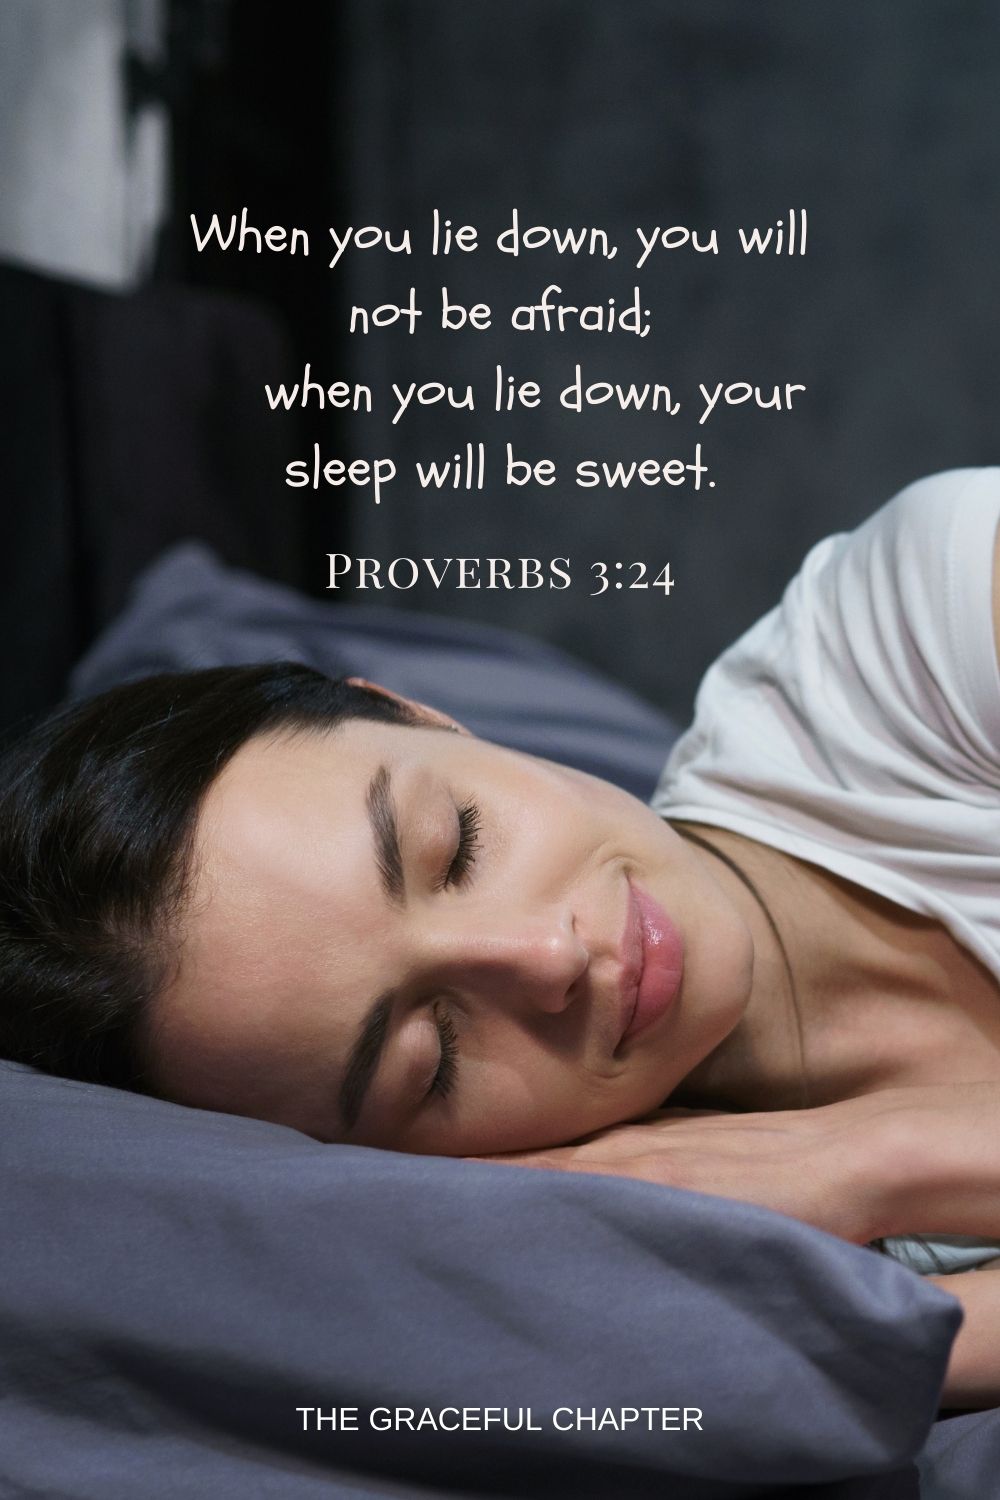 comforting bedtime bible verses - When you lie down, you will not be afraid; when you lie down, your sleep will be sweet. Proverbs 3:24